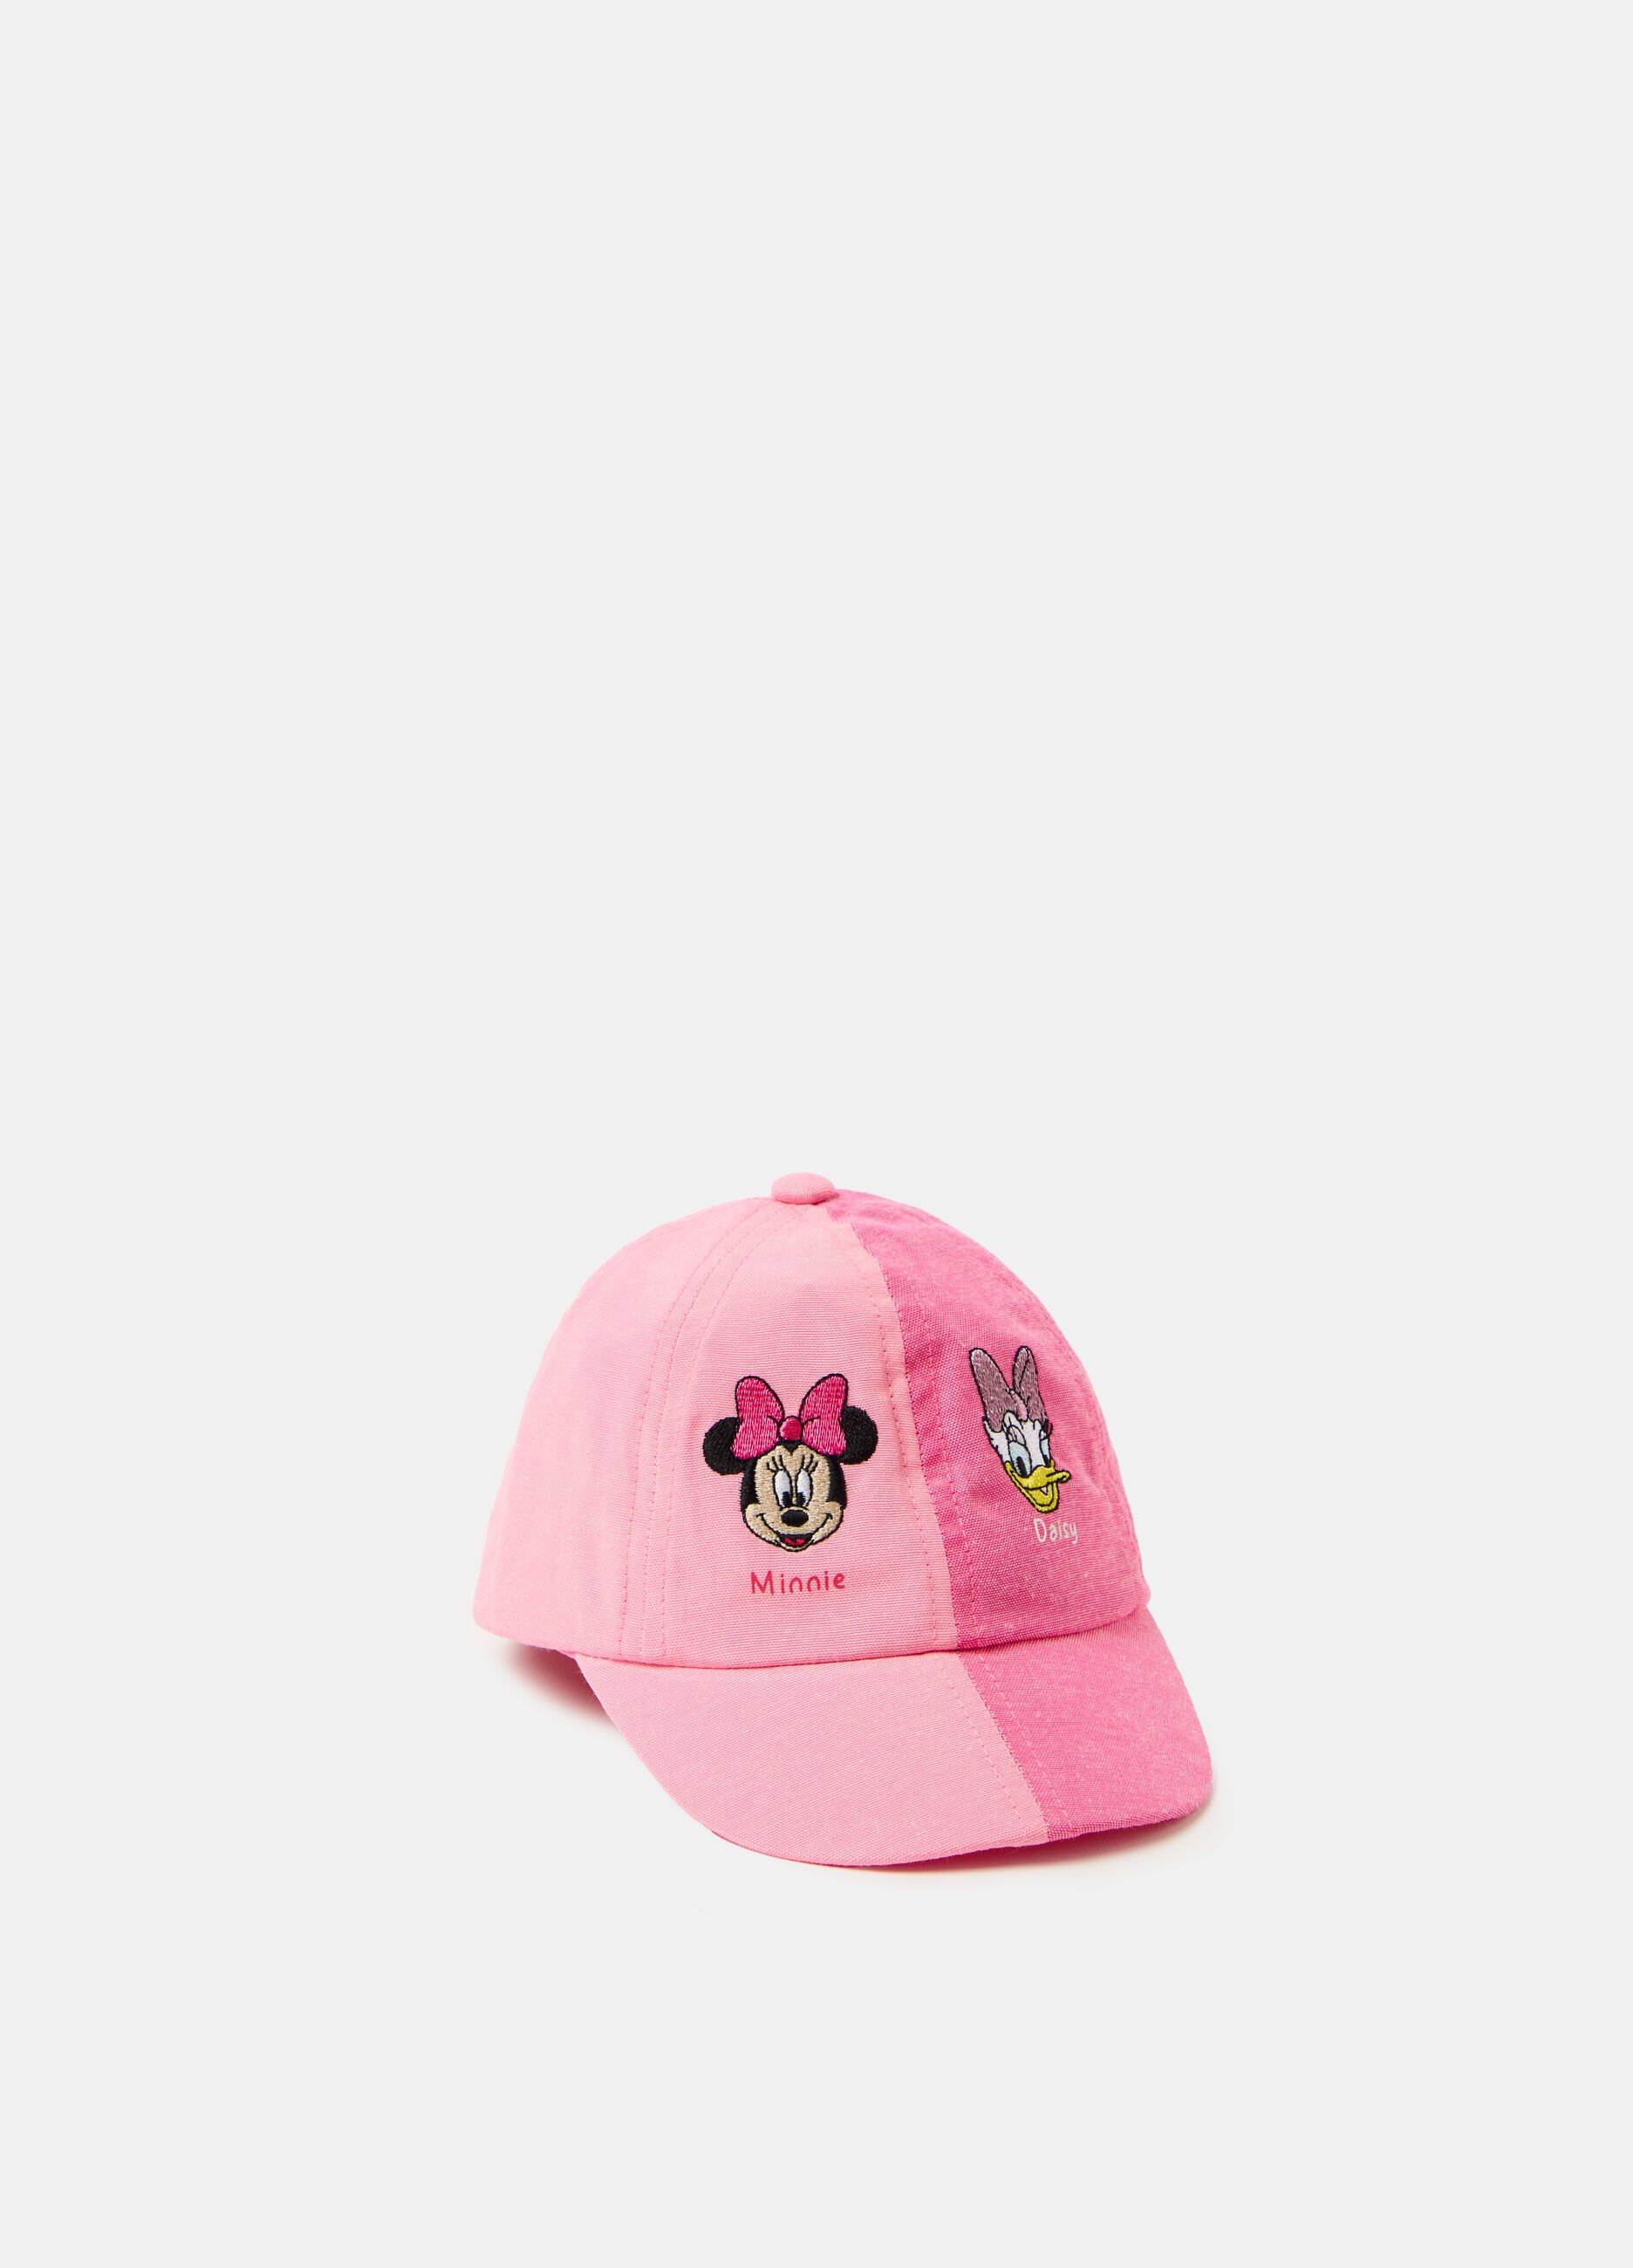 Baseball cap with Minnie Mouse and Daisy Duck embroidery